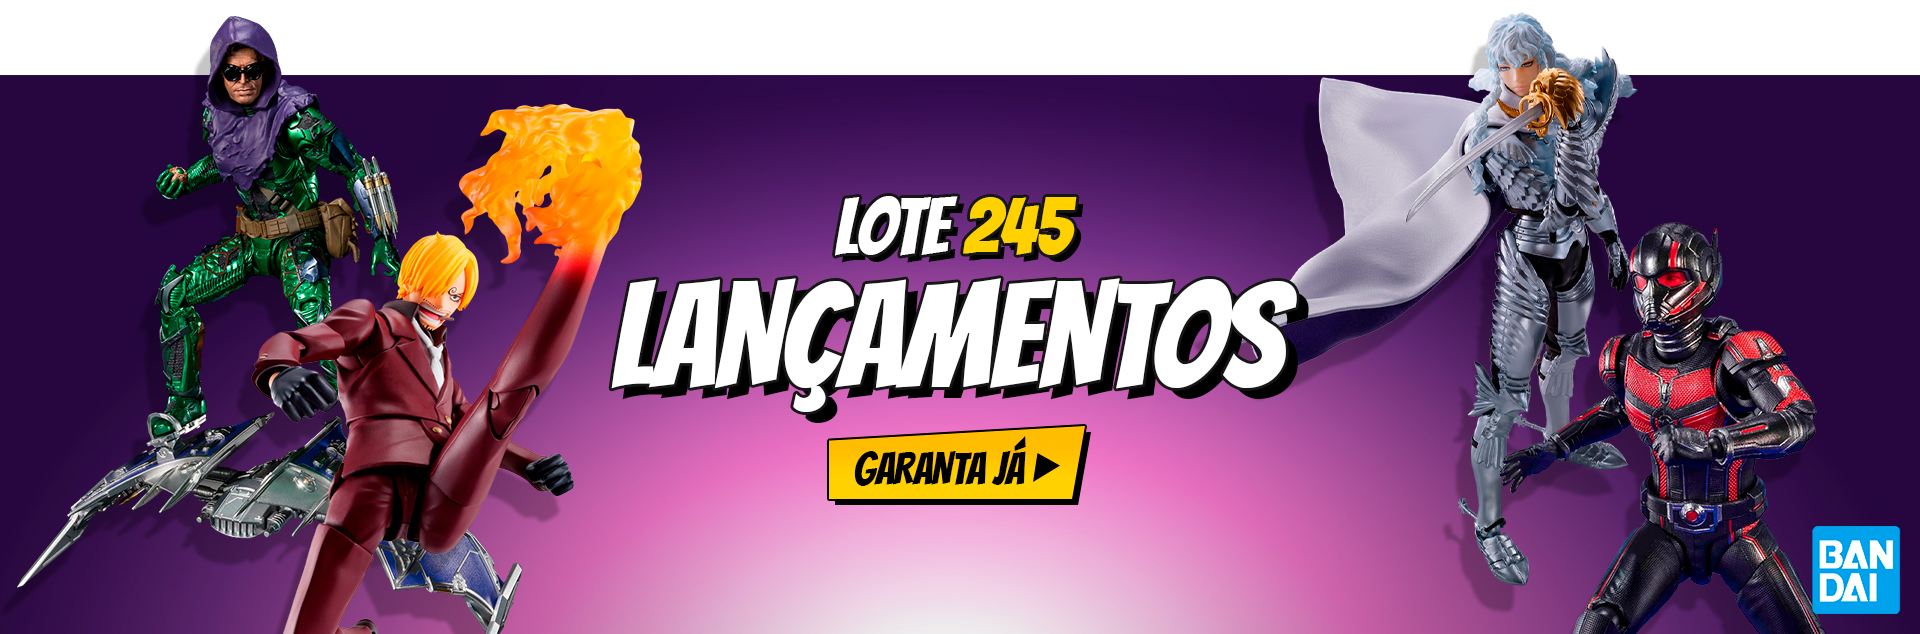 Lote 245